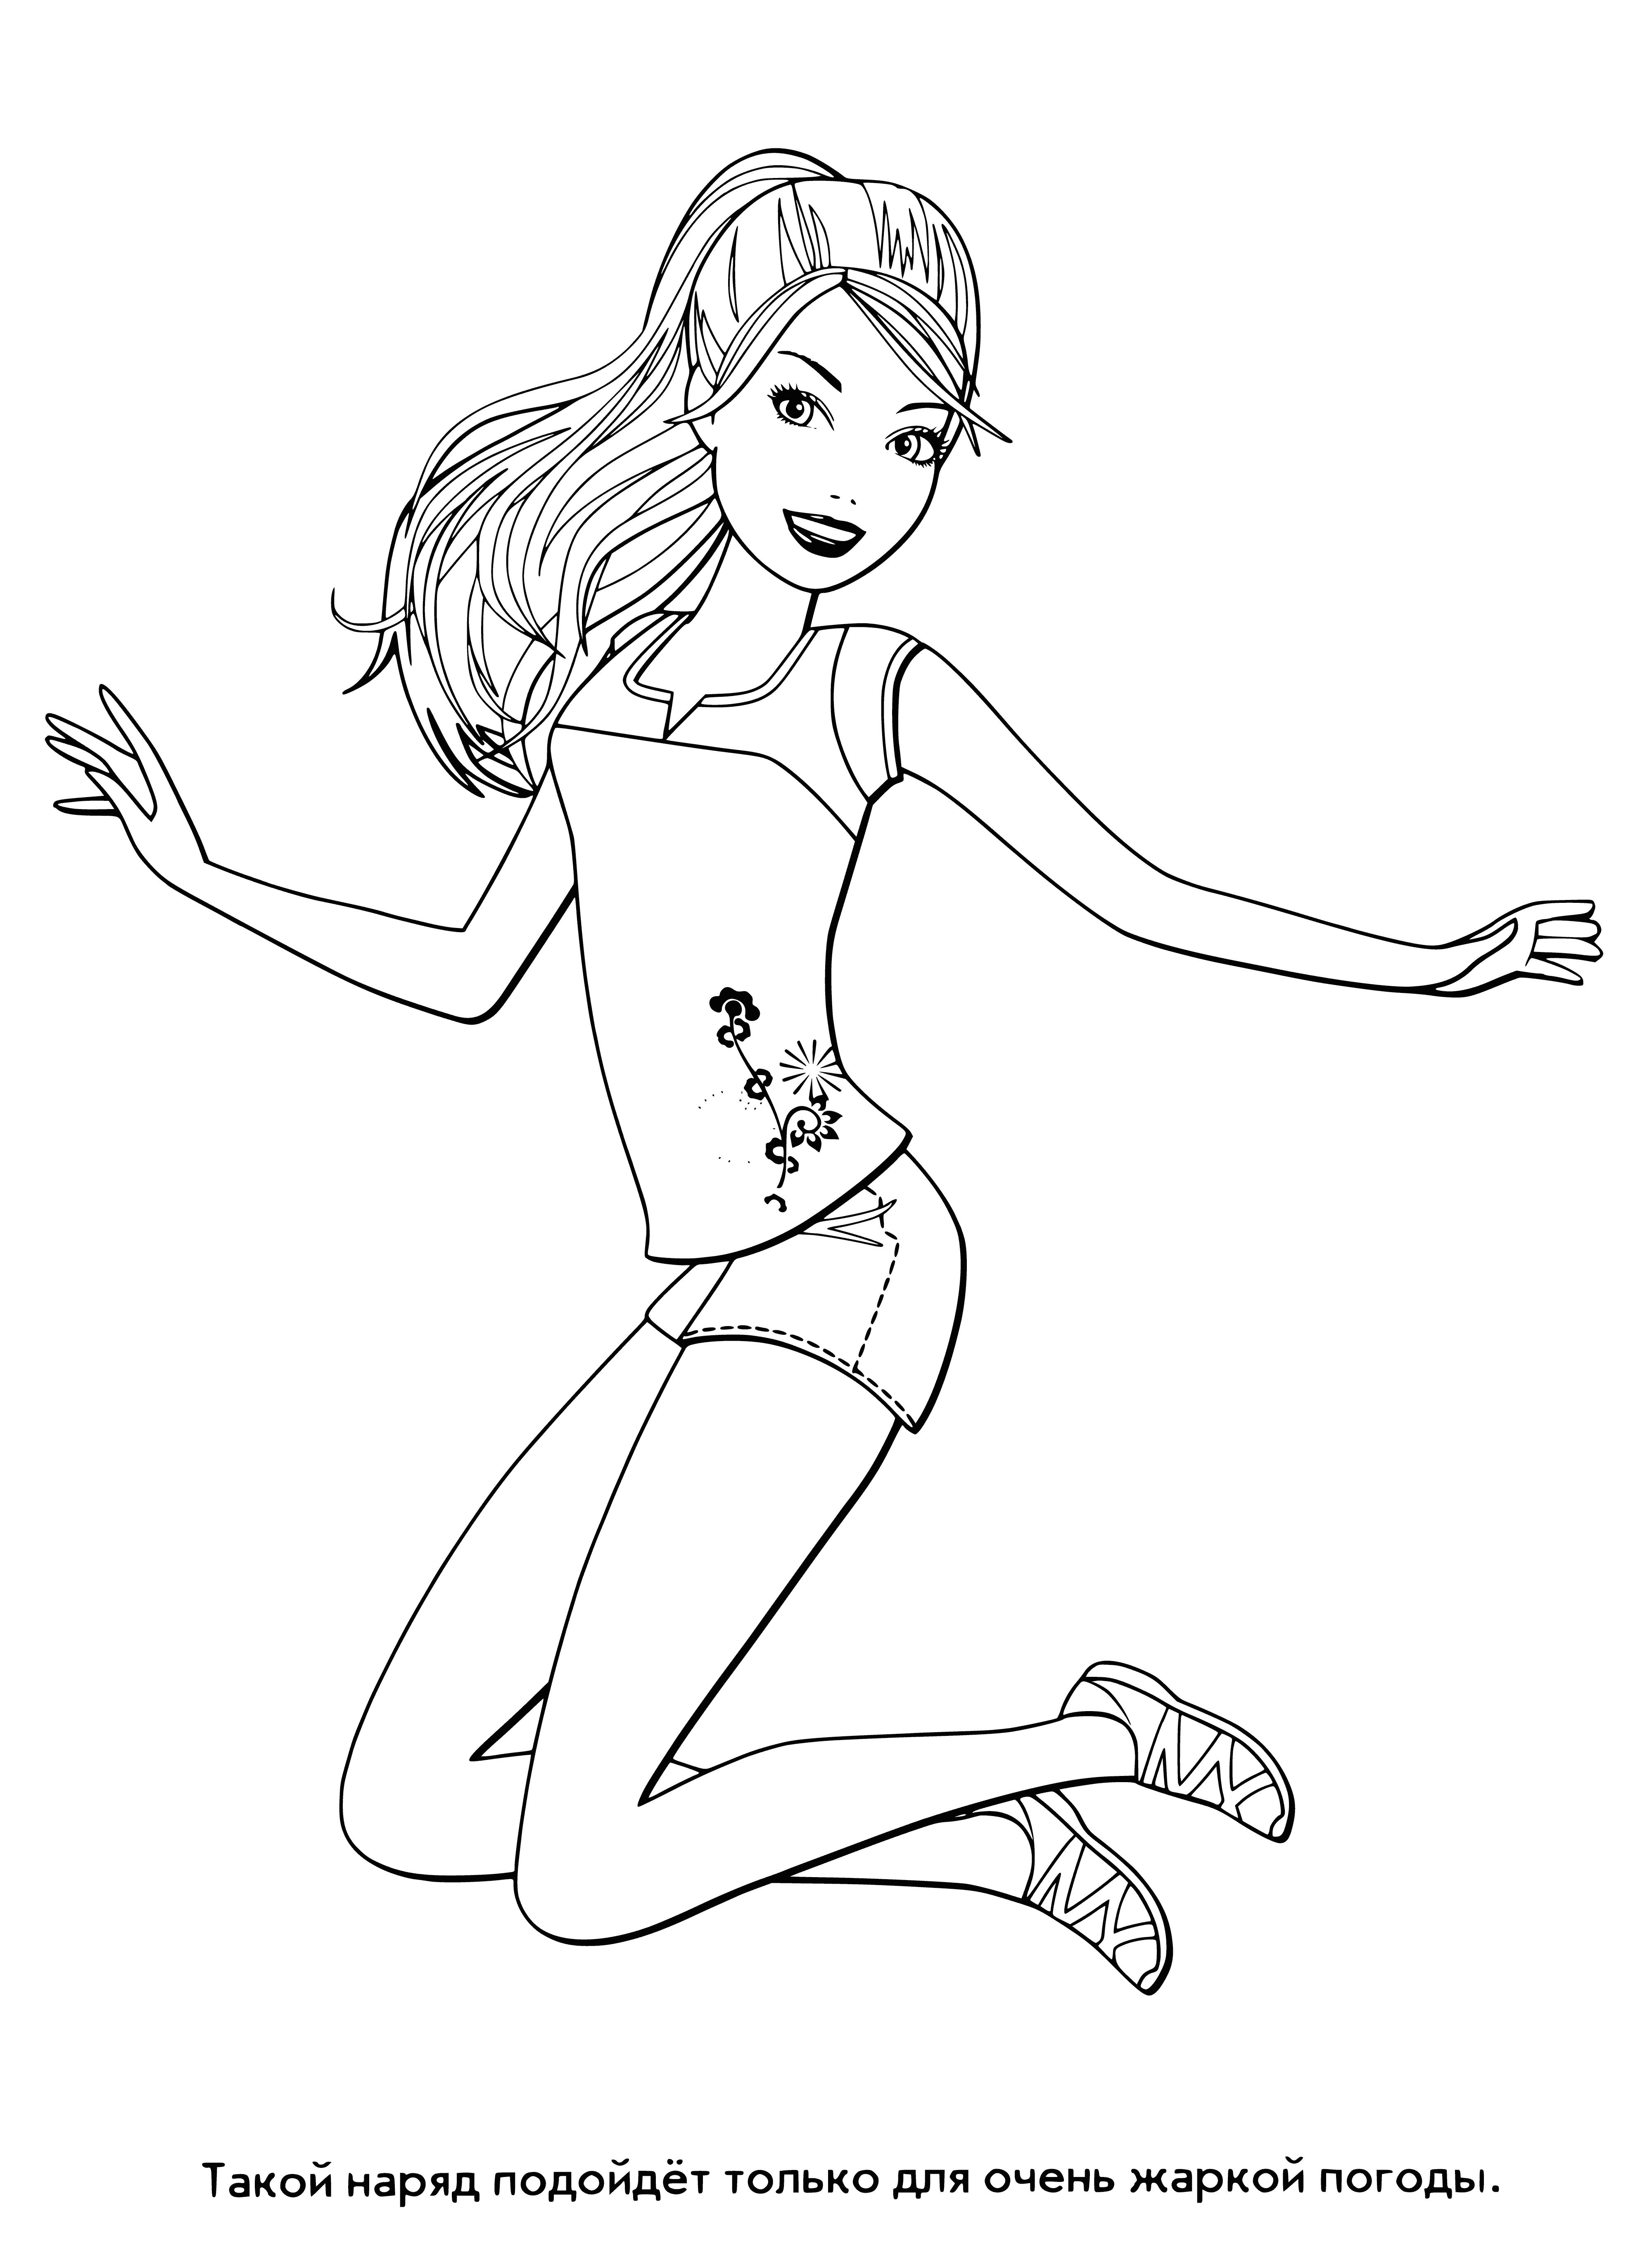 coloring page: Barbie's summer look: White shirt, blue/white striped skirt, white hat & blue shoes.